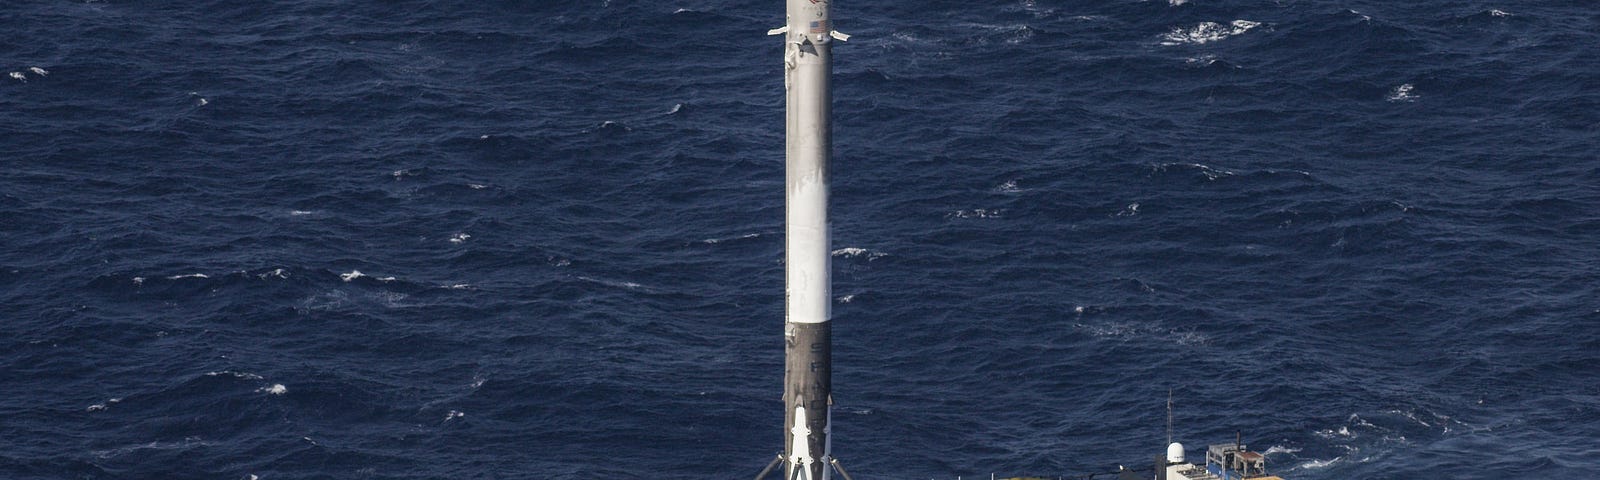 SpaceX stage one rocket resting on autonomous drone ship Of Course I Still Love You